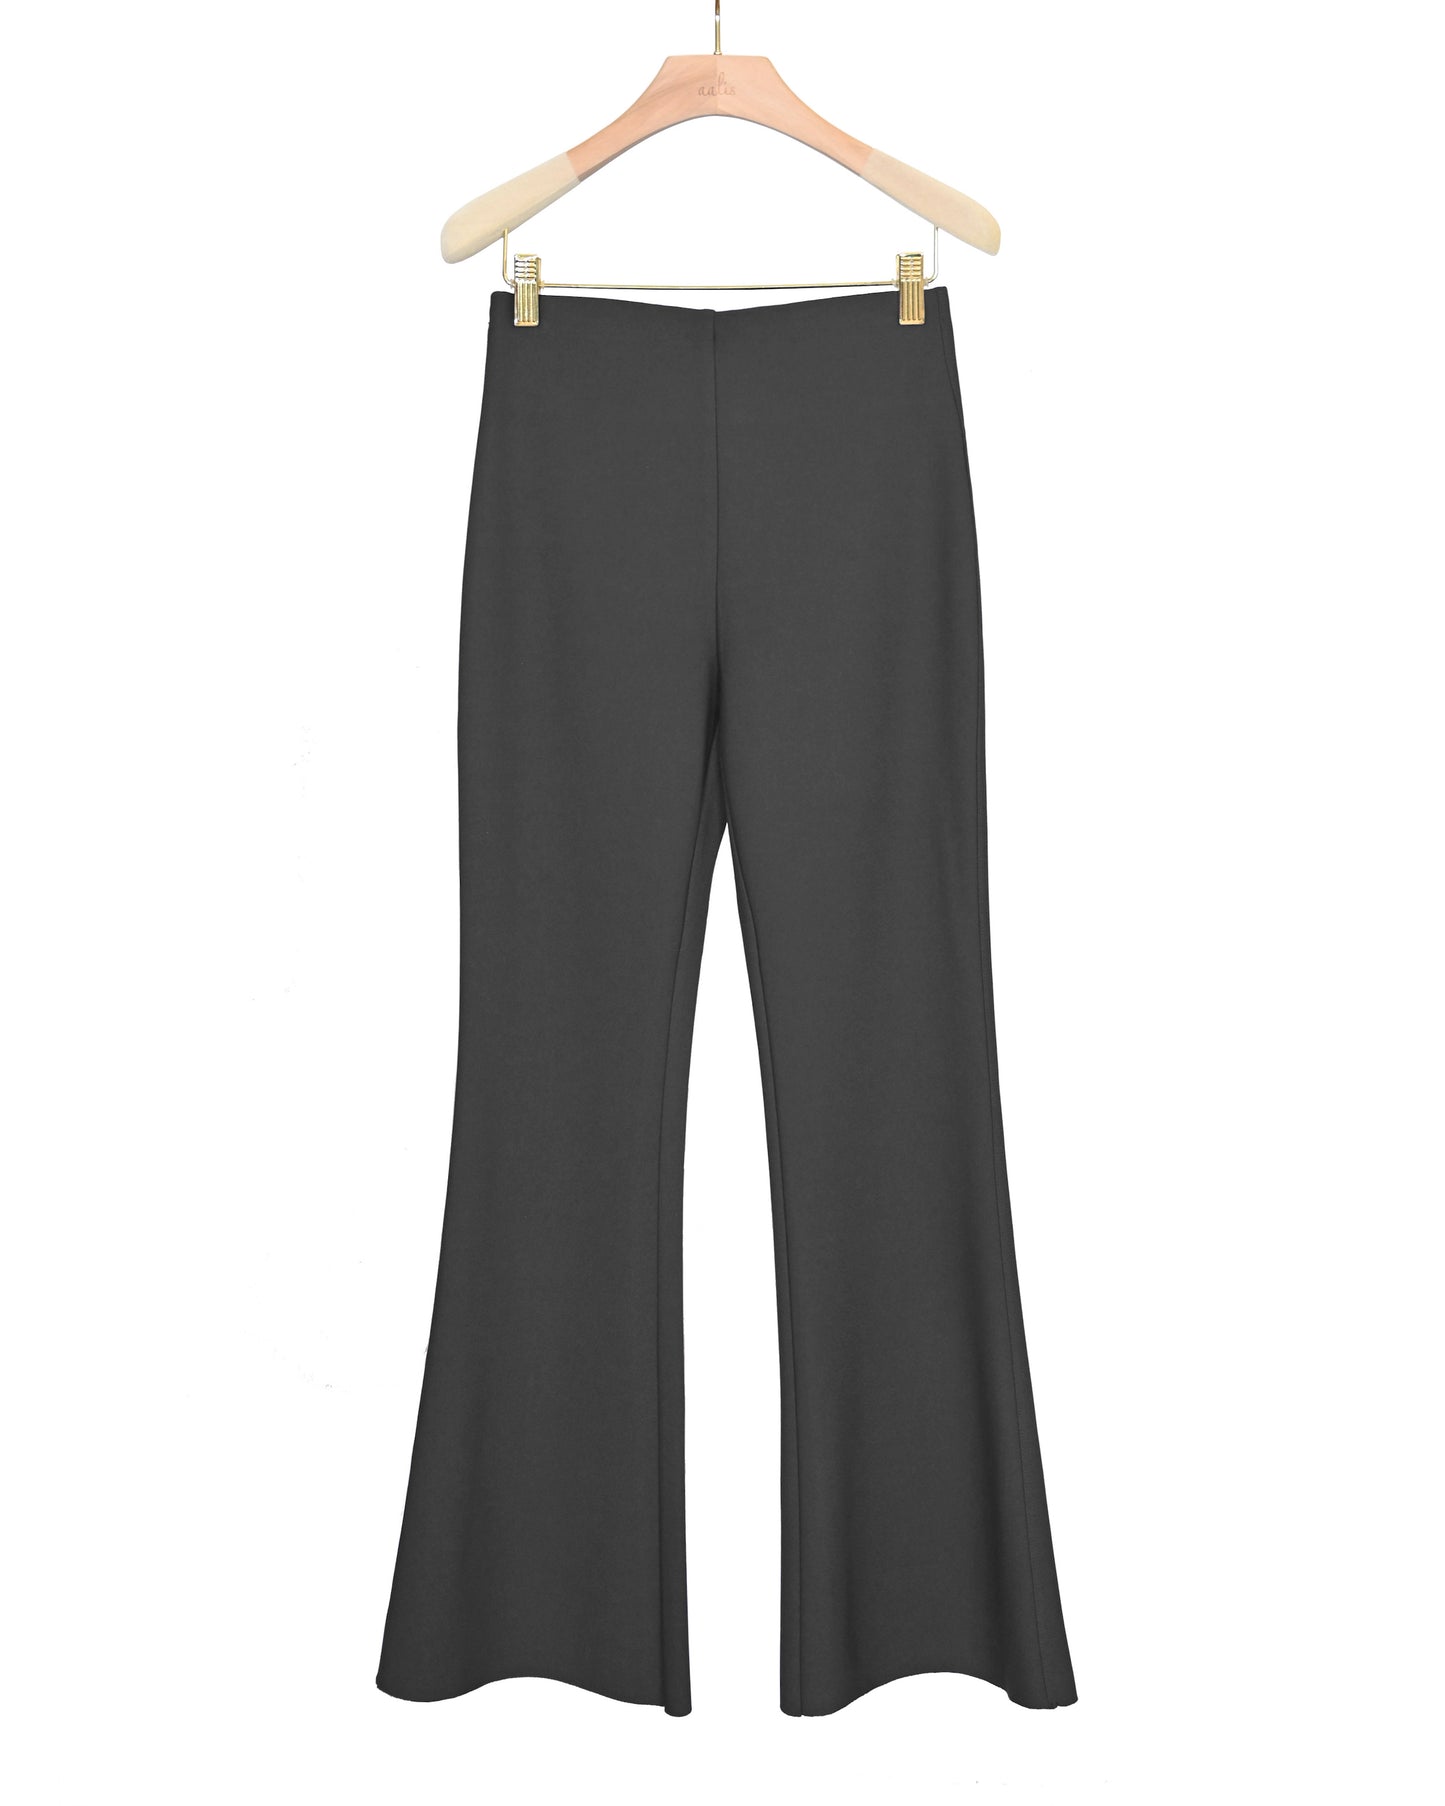 aalis LILI double knit flare pants (Charcoal)